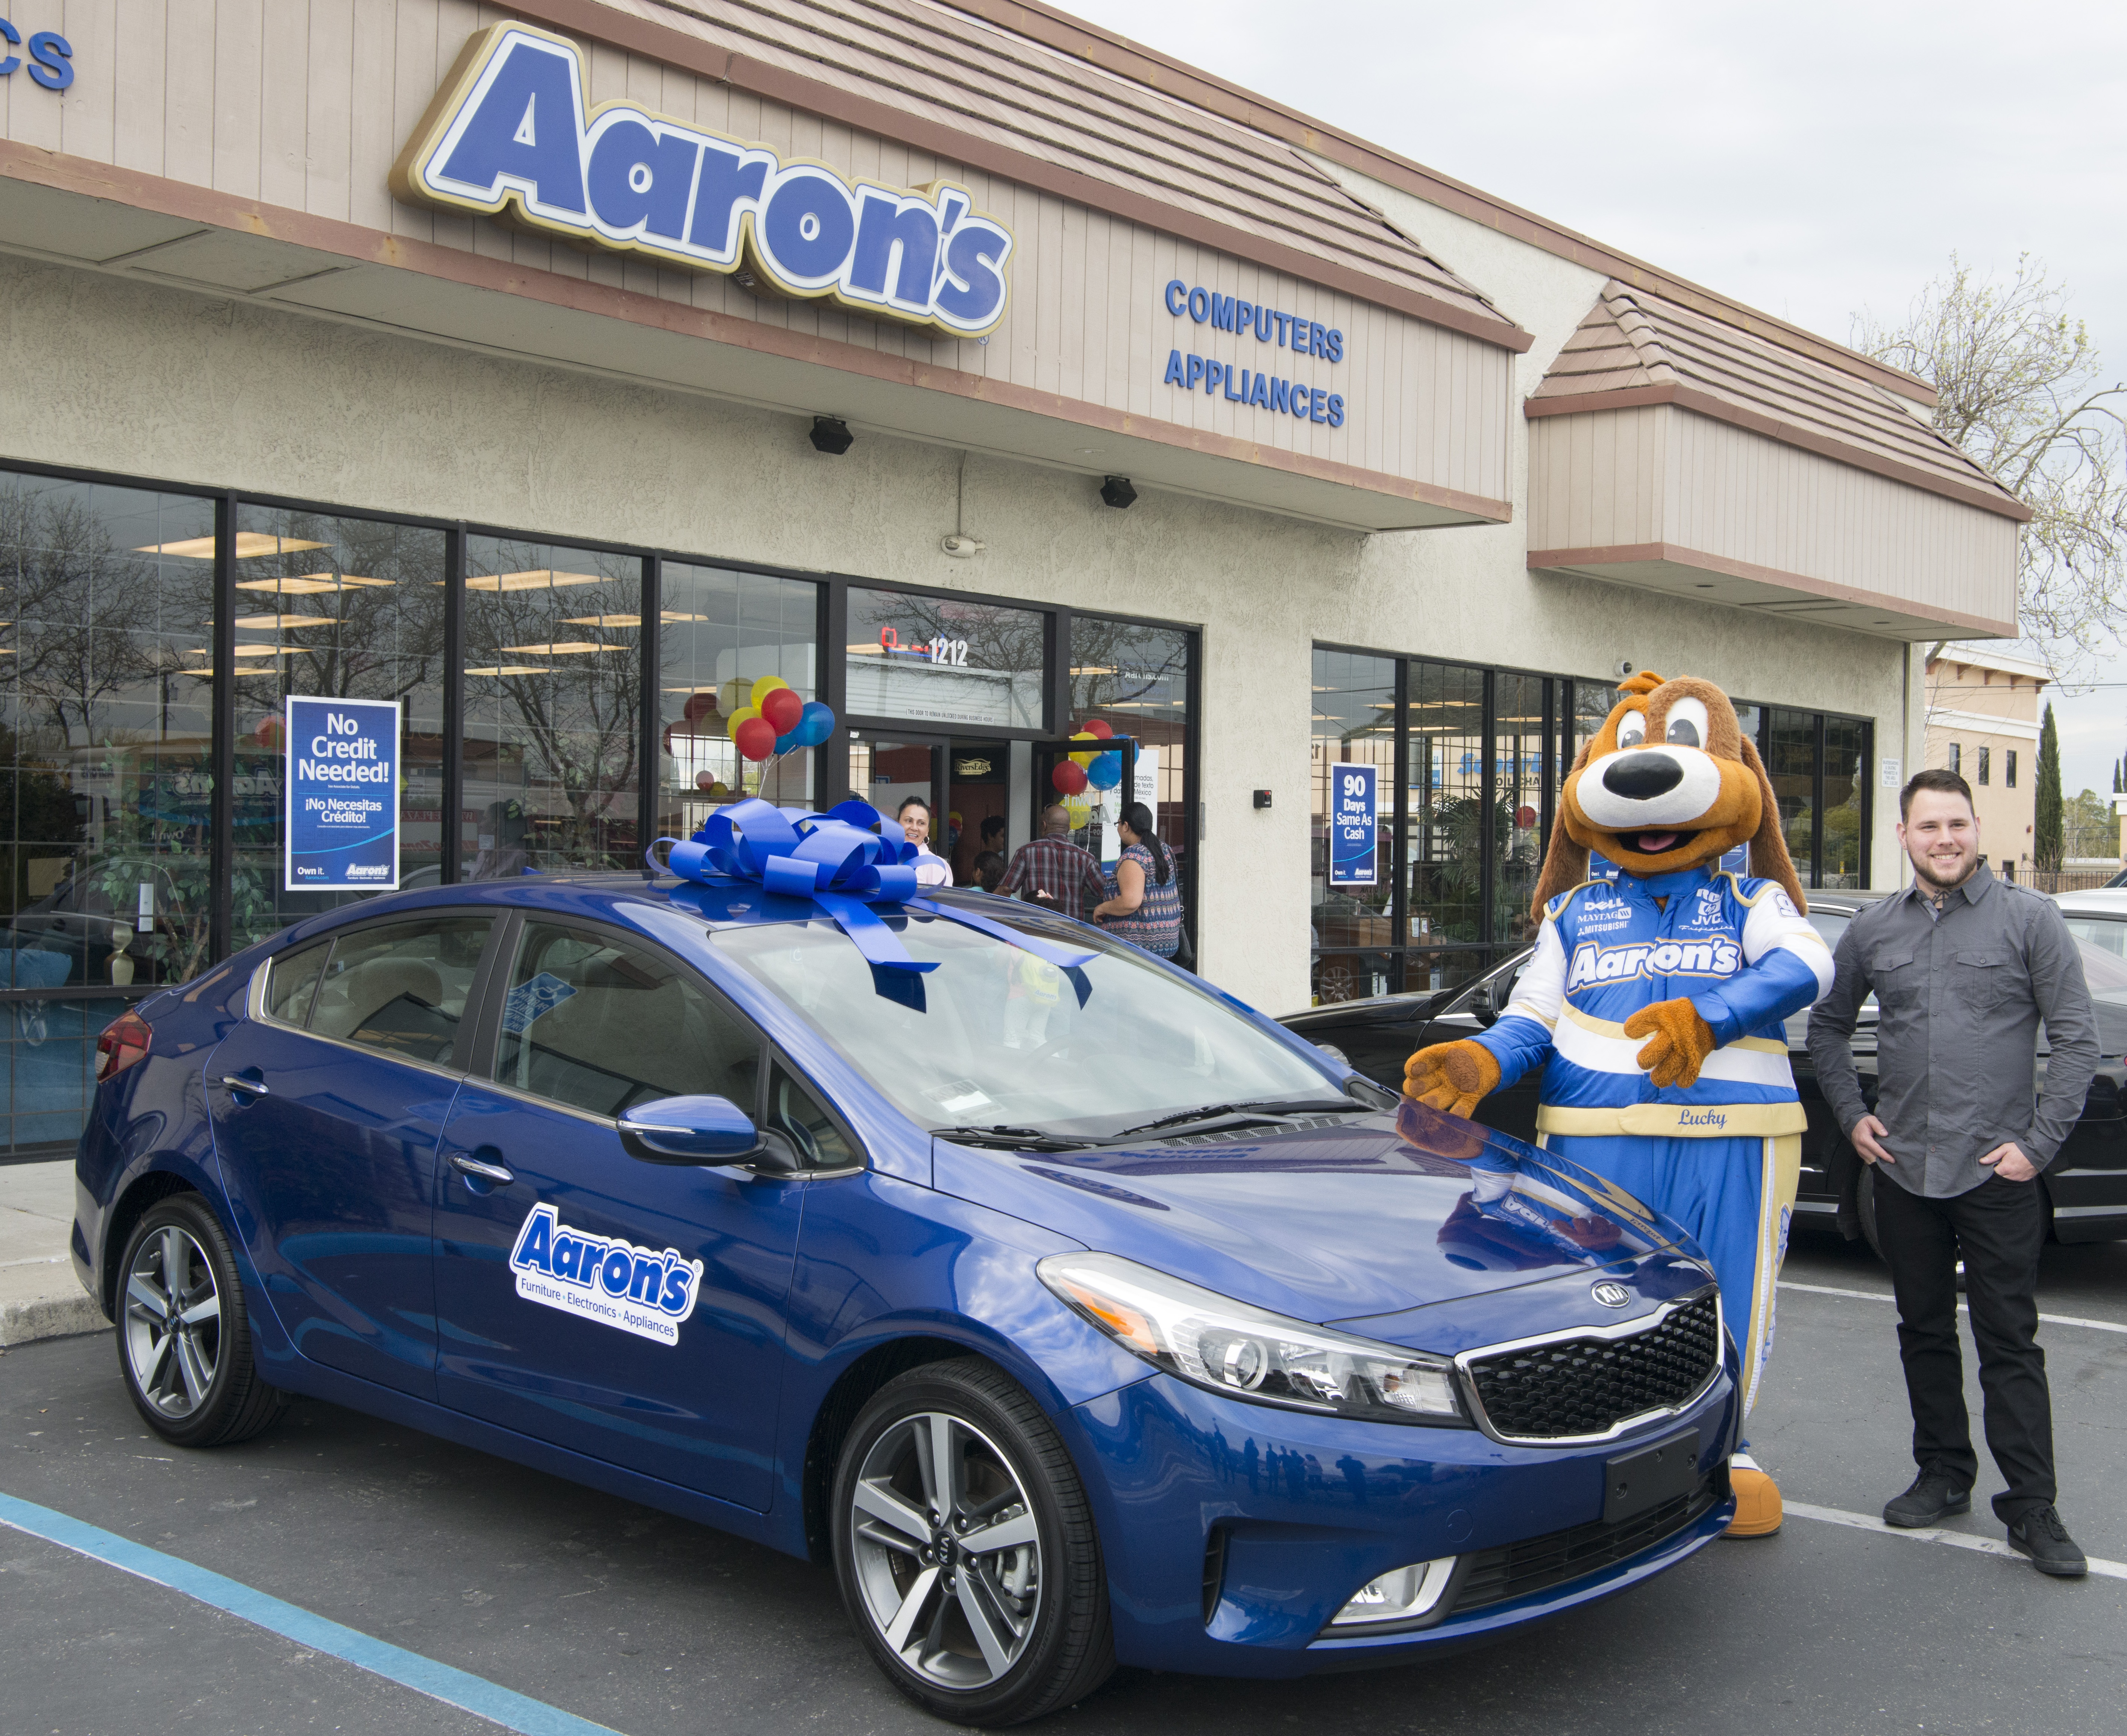 Winner of Aaron's Big Blue Bow Kia Giveaway Adam Barbour receives his 2017 Kia Forte at the Aaron's store in Tracy Calif., on Wednesday, March 15, 2017. (Peter Barreras/AP Images for Aaron's, Inc)